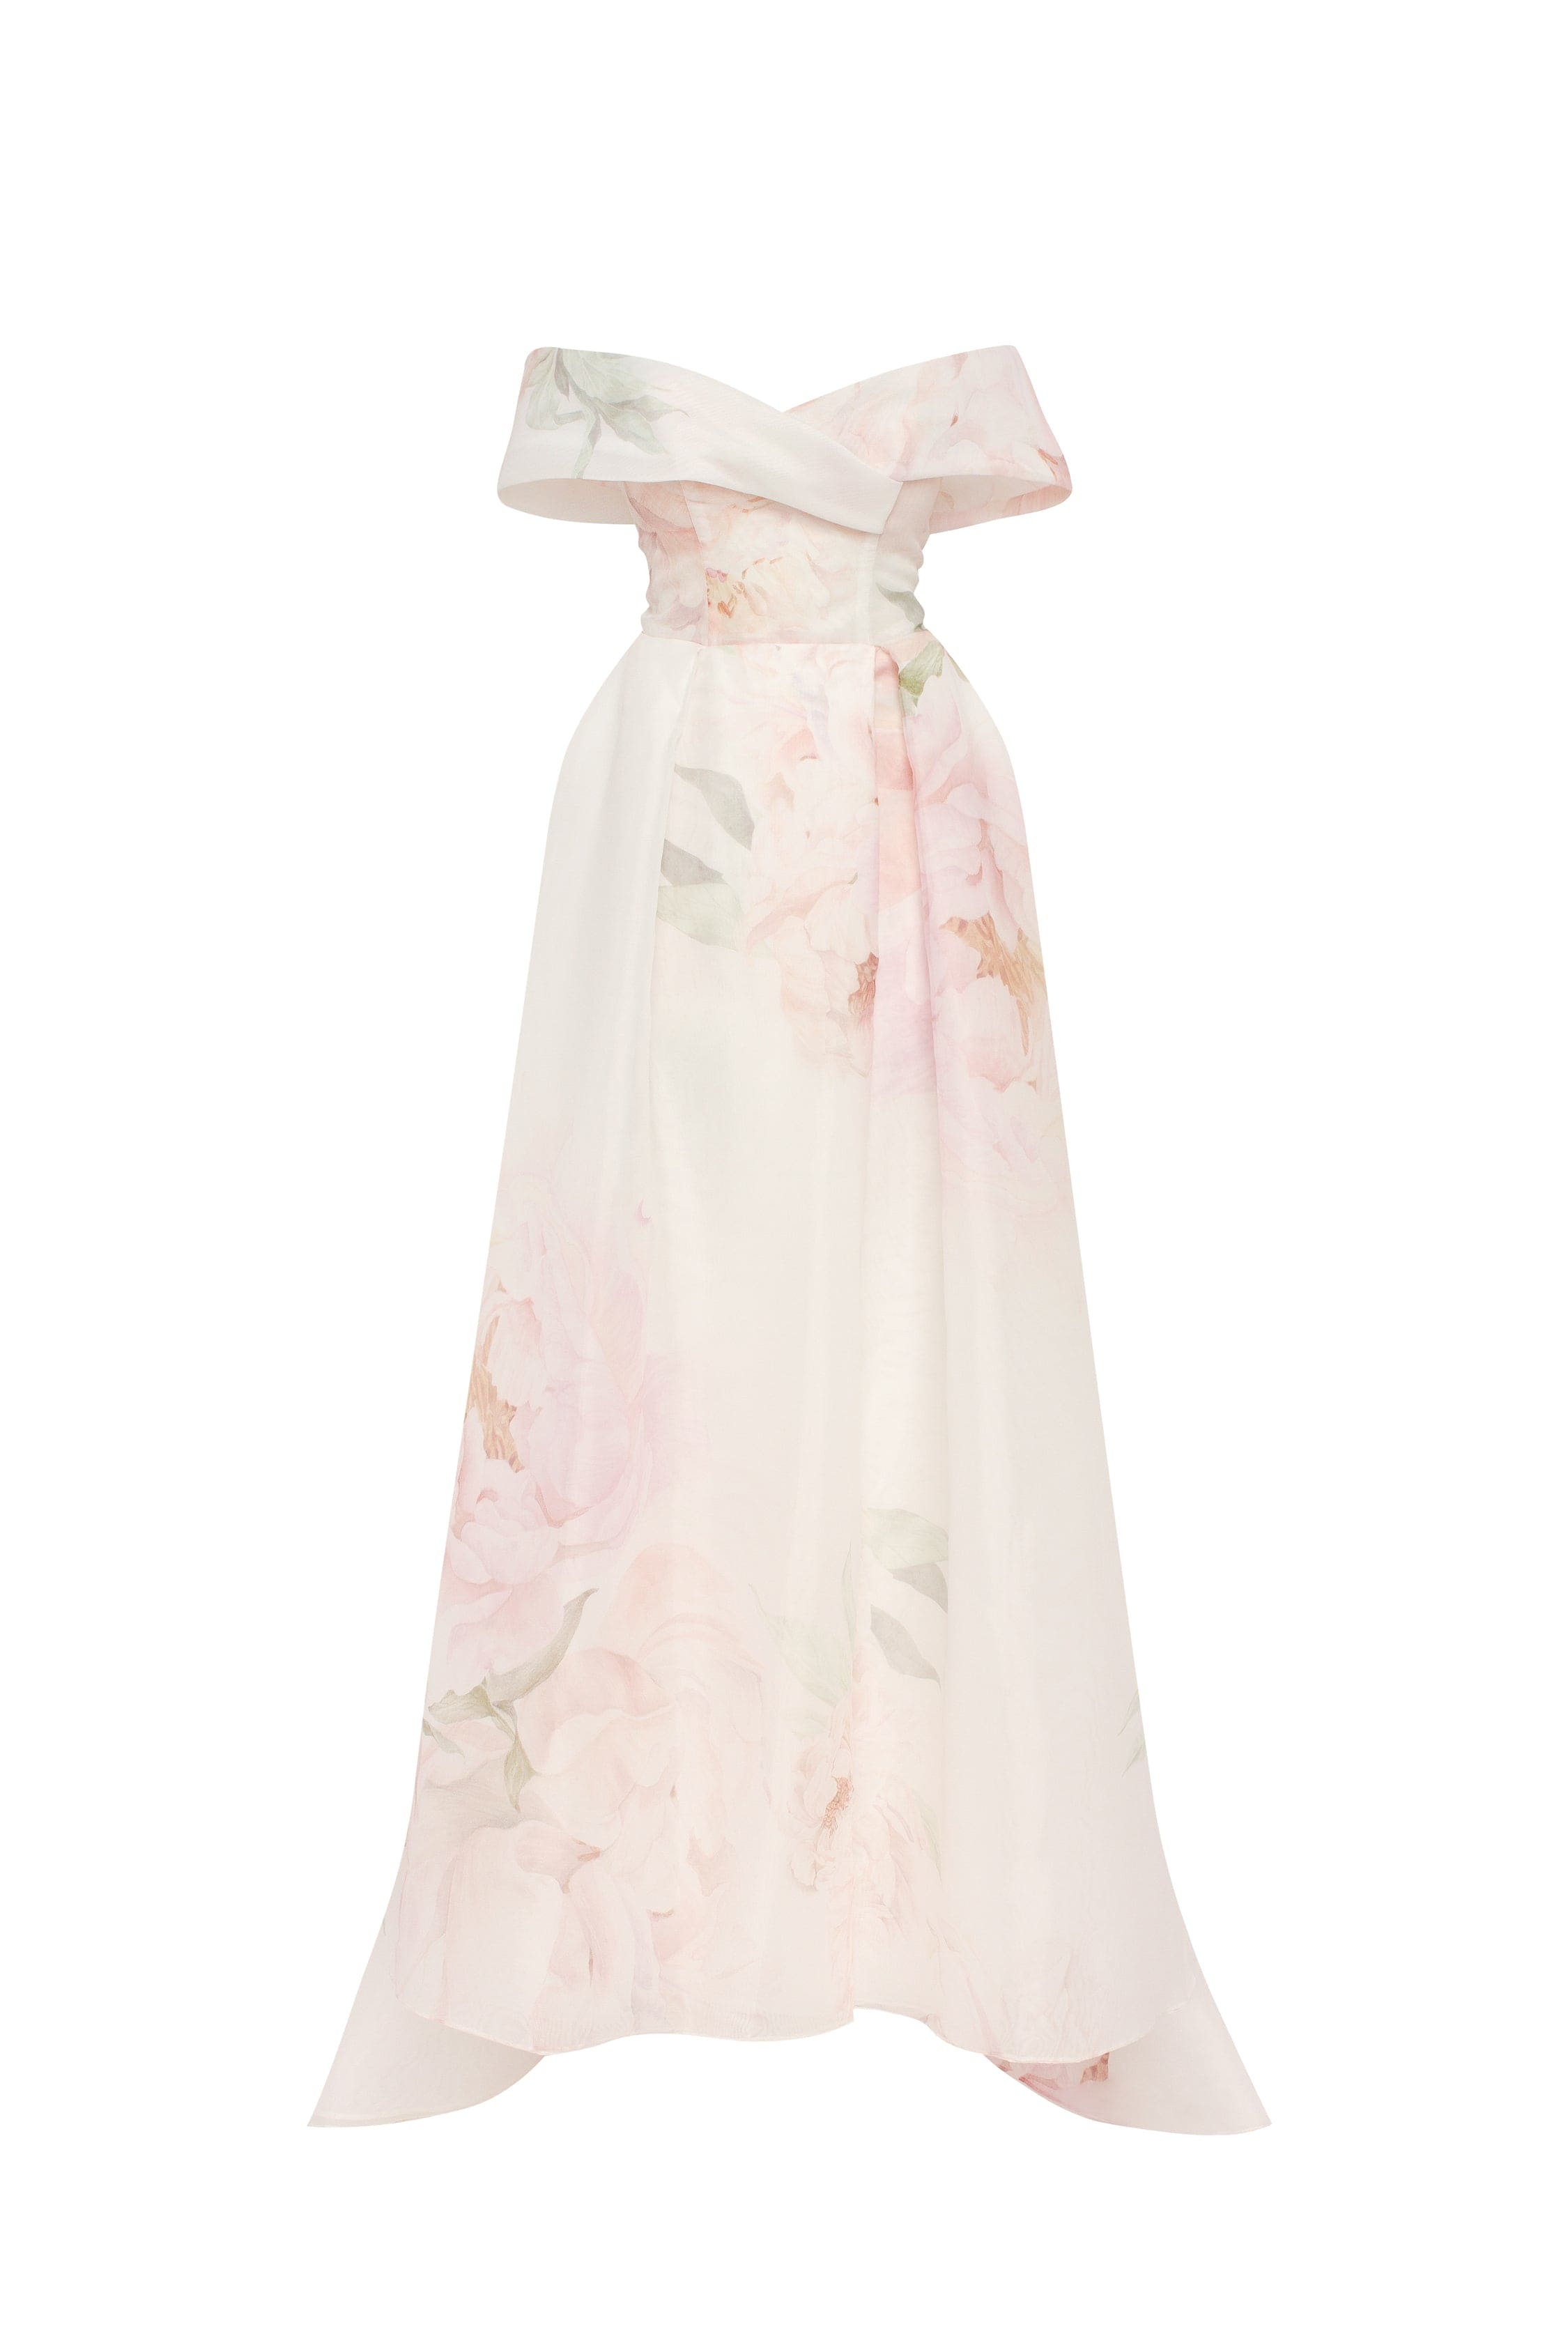 Dramatically flowered tulle dress in white ➤➤ Milla Dresses - USA,  Worldwide delivery